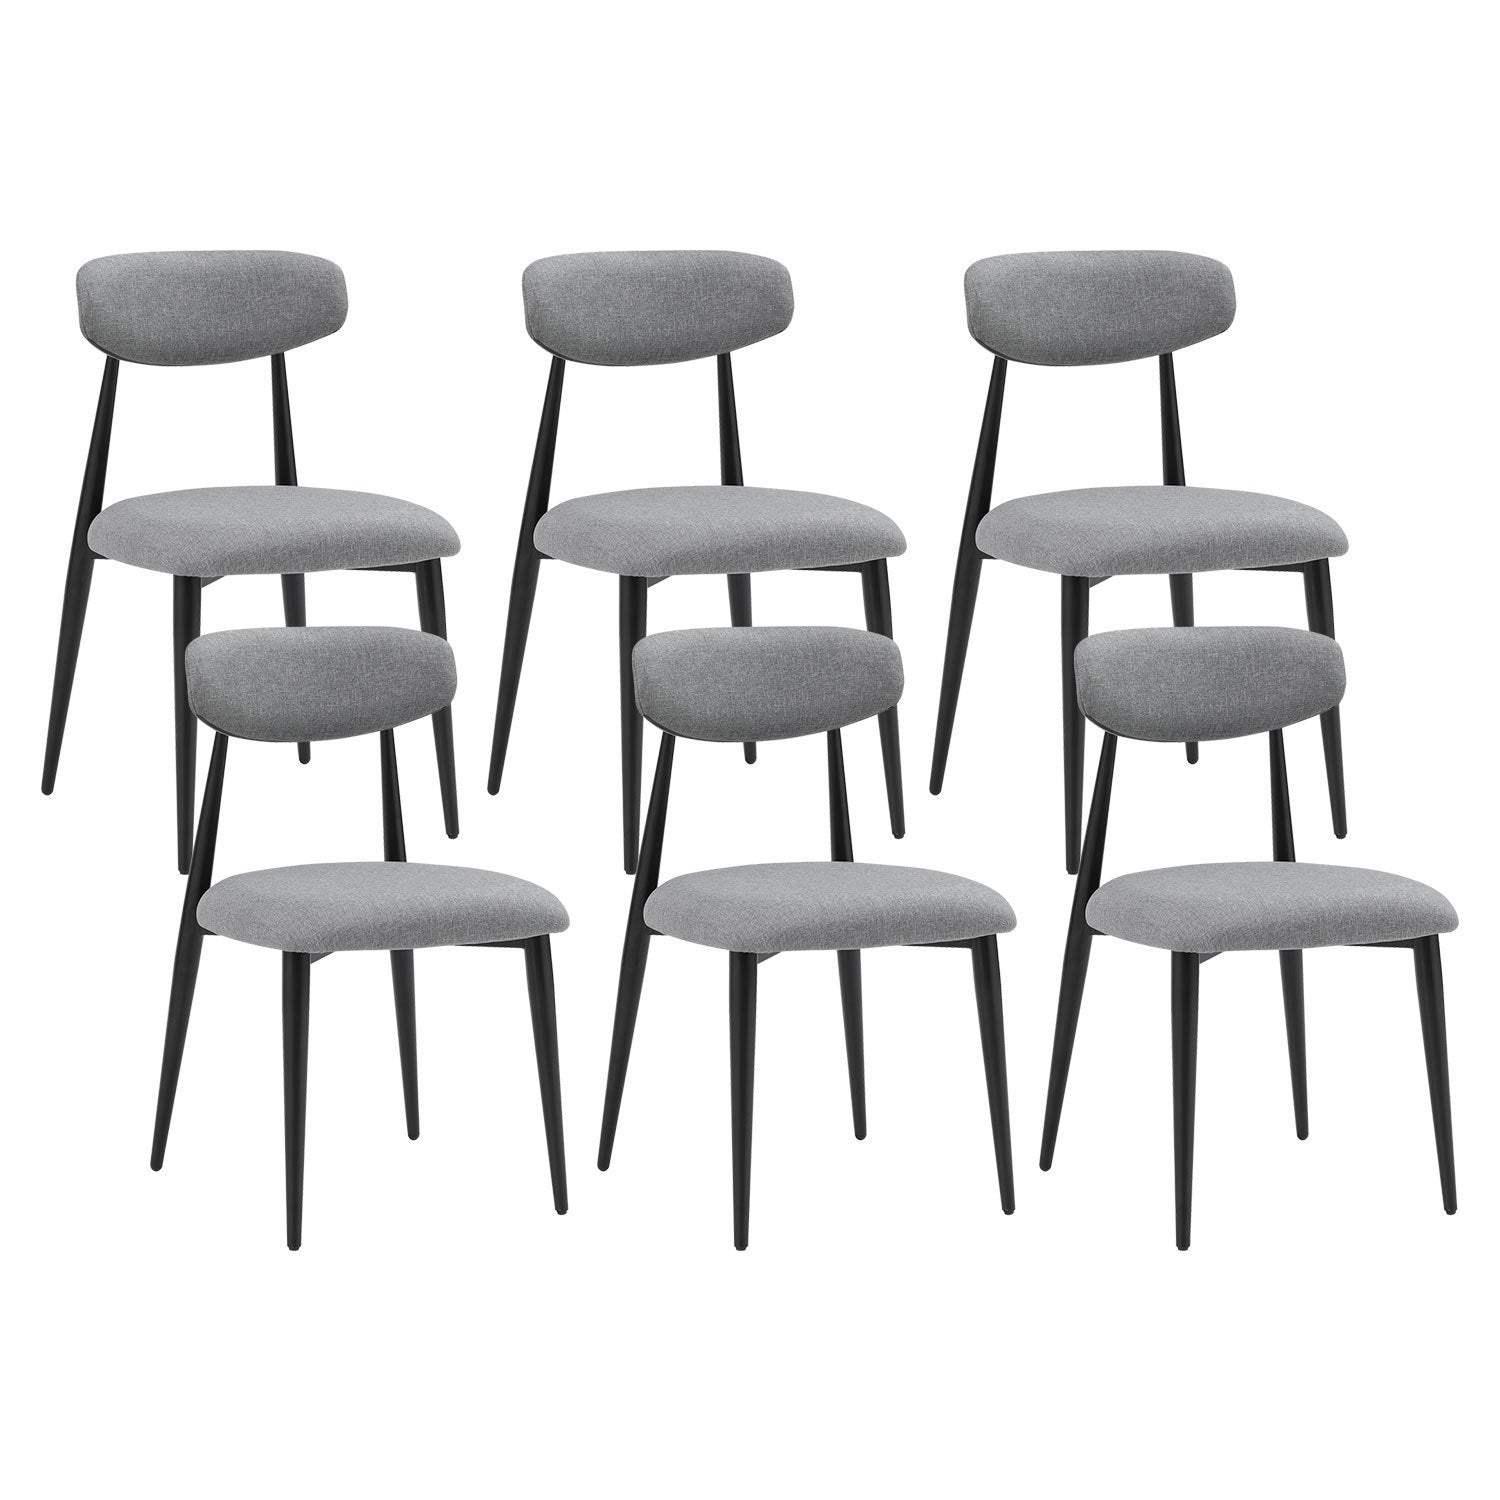 (Set of 6) Dining Chairs, Upholstered Chairs with Metal Legs for Kitchen Dining Room,Grey